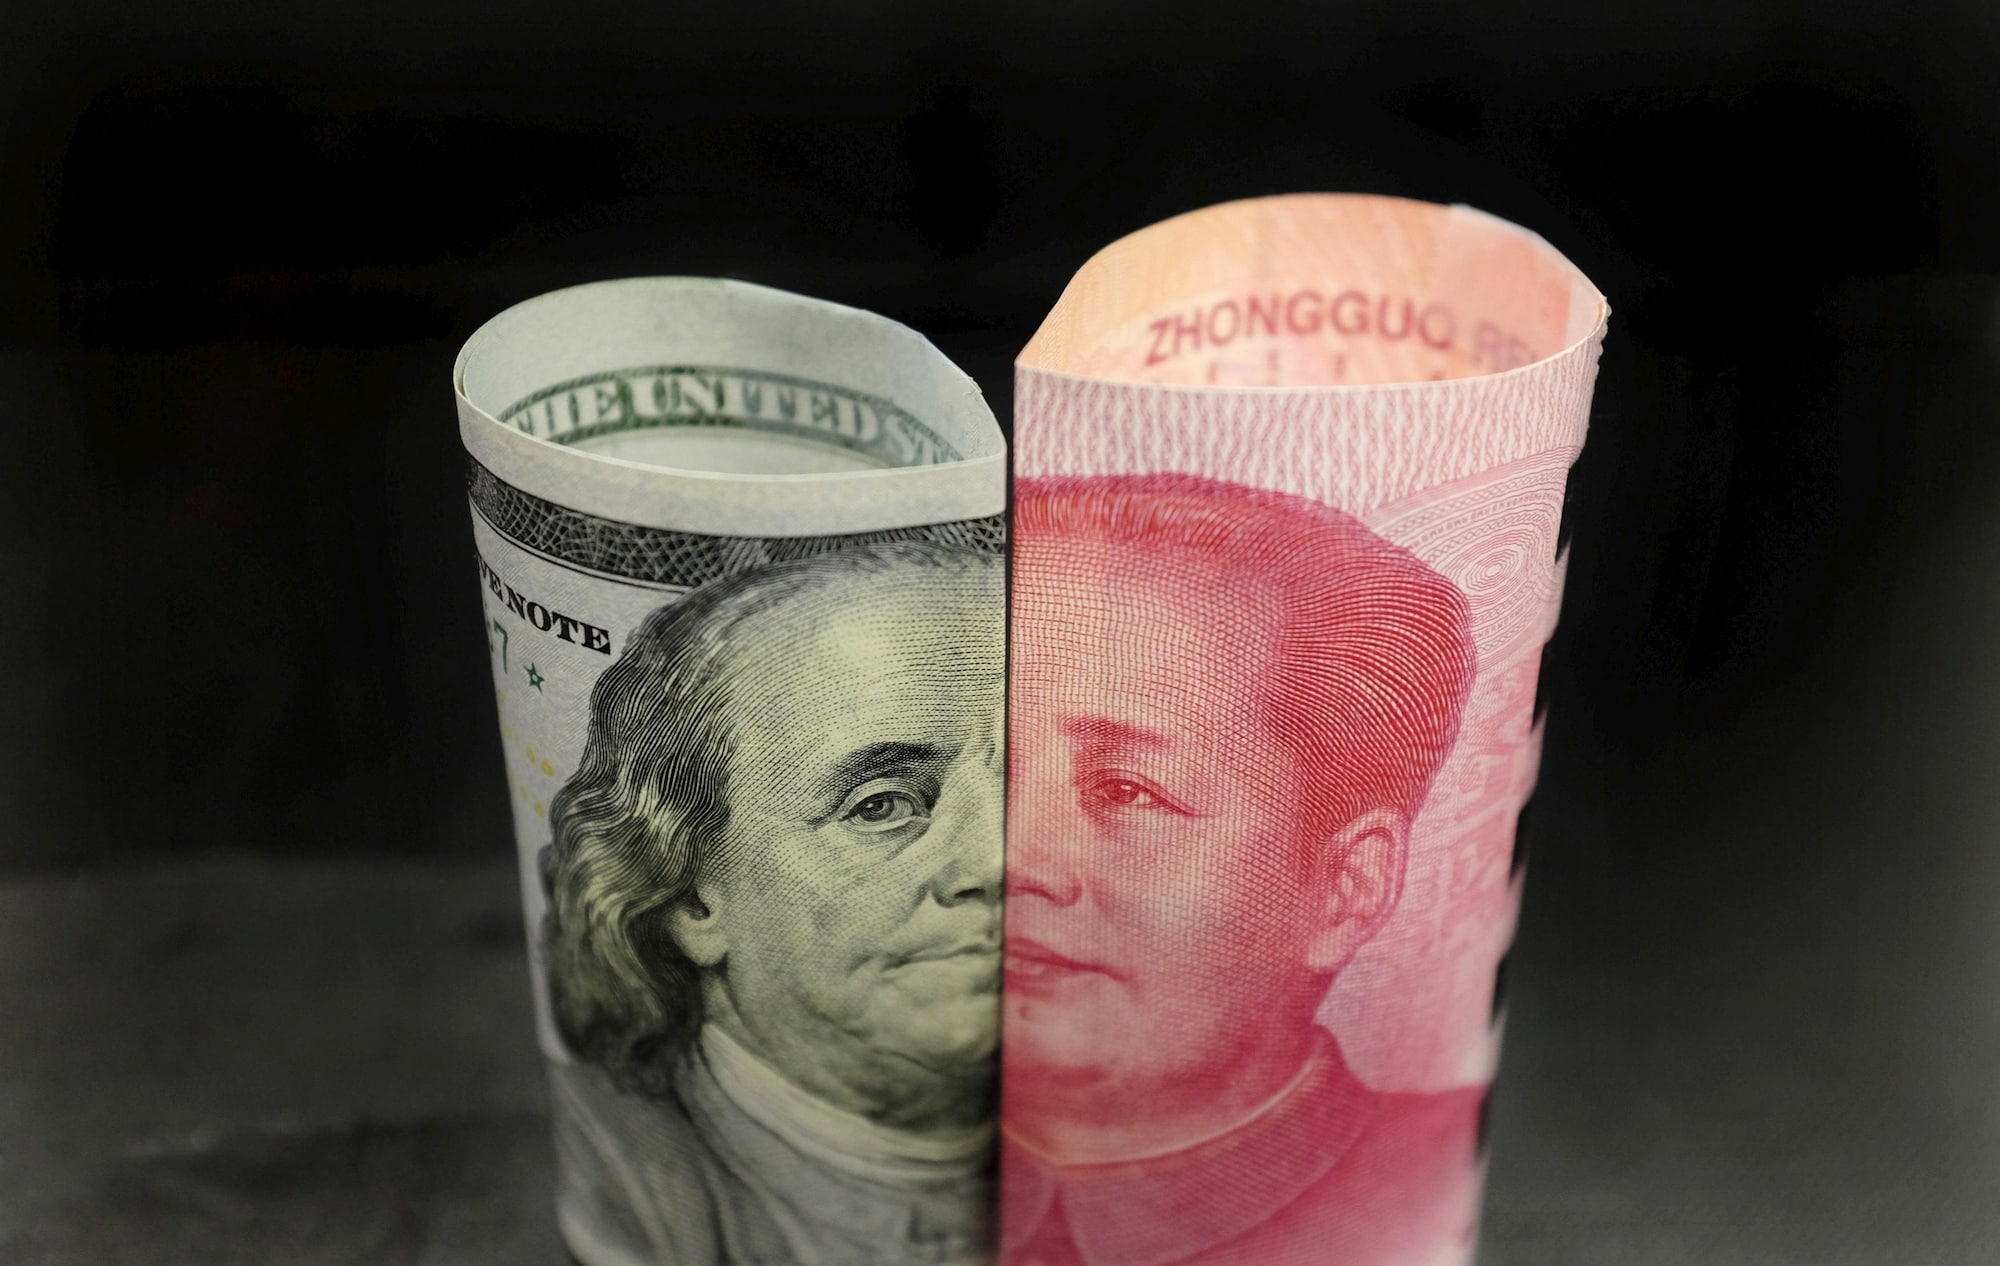 US Treasury drops China currency manipulator label ahead of trade deal signing